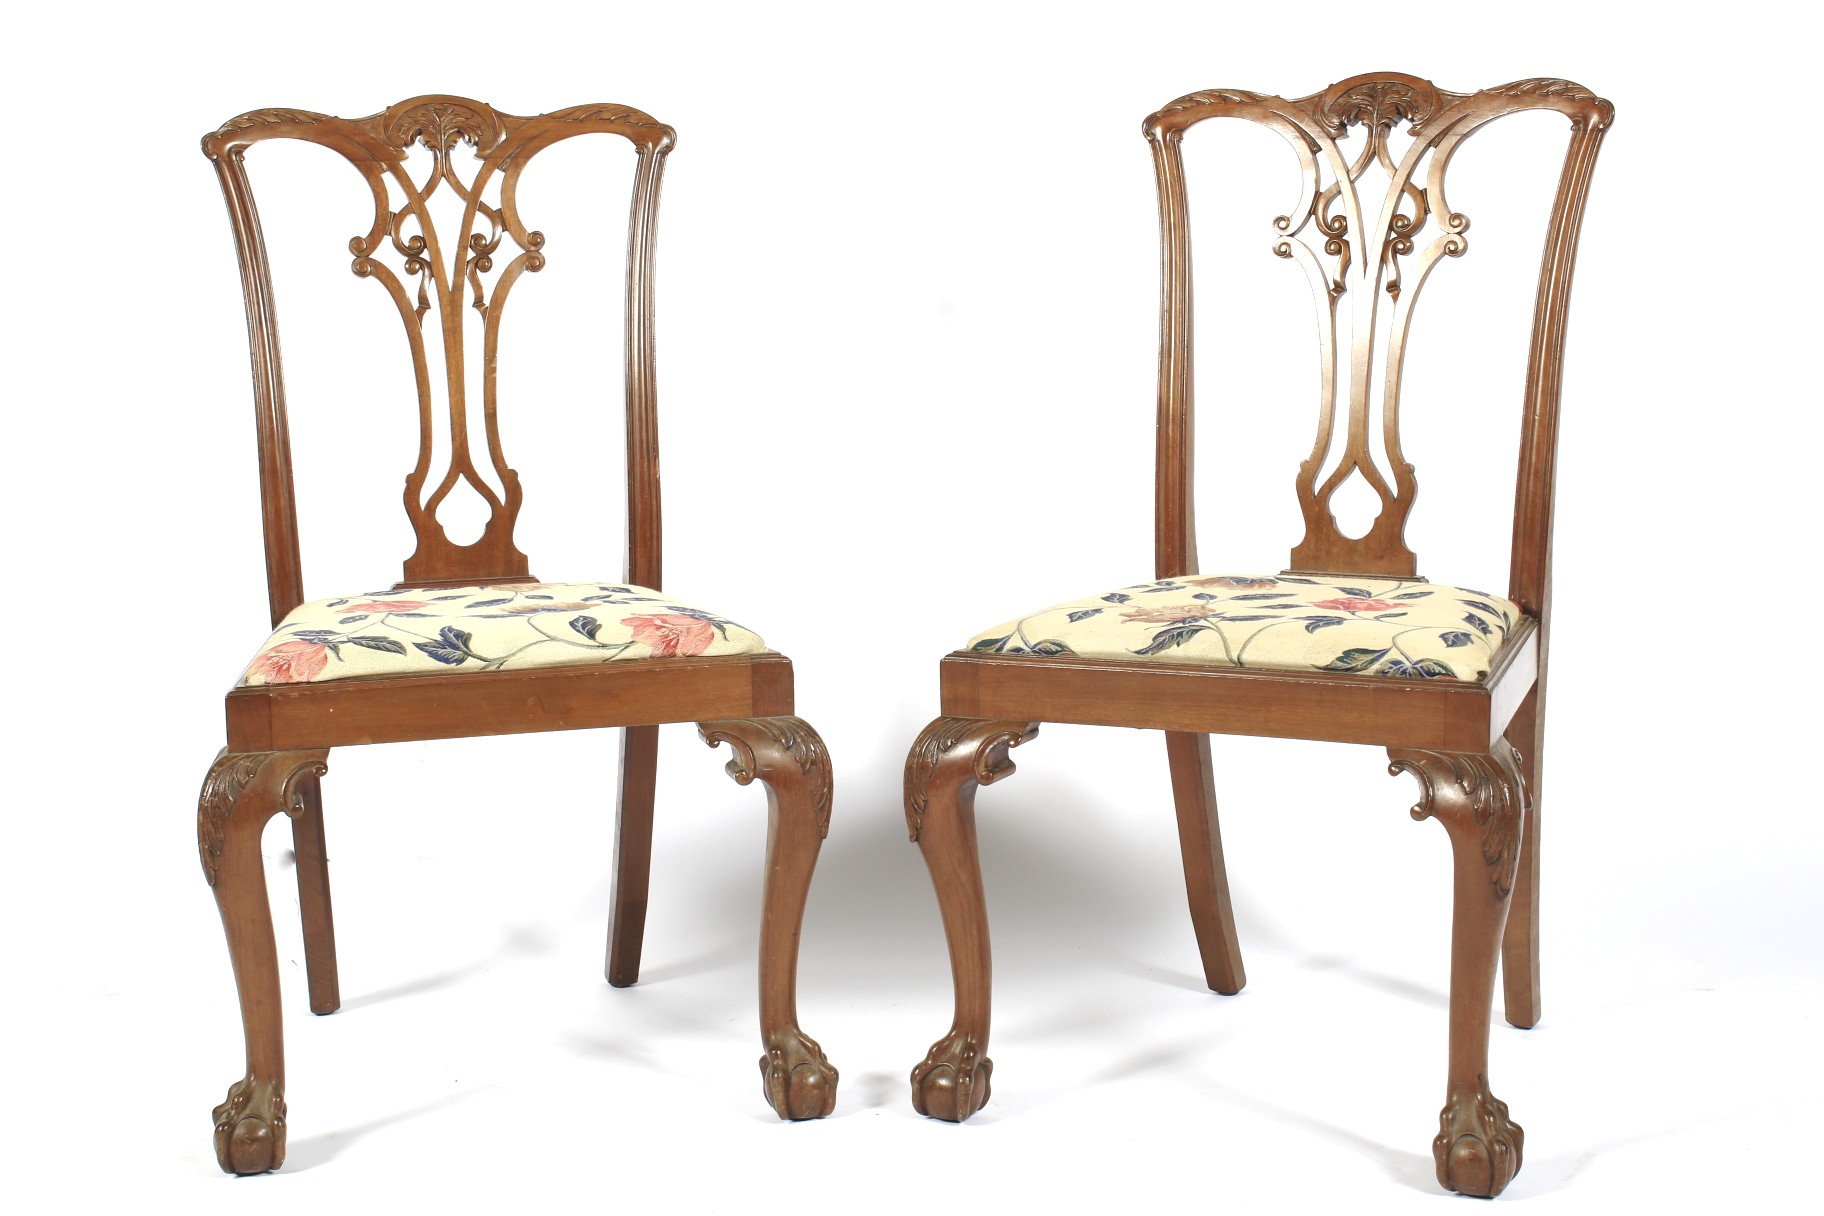 A Pair of mahogany Chippendale style dining chairs.